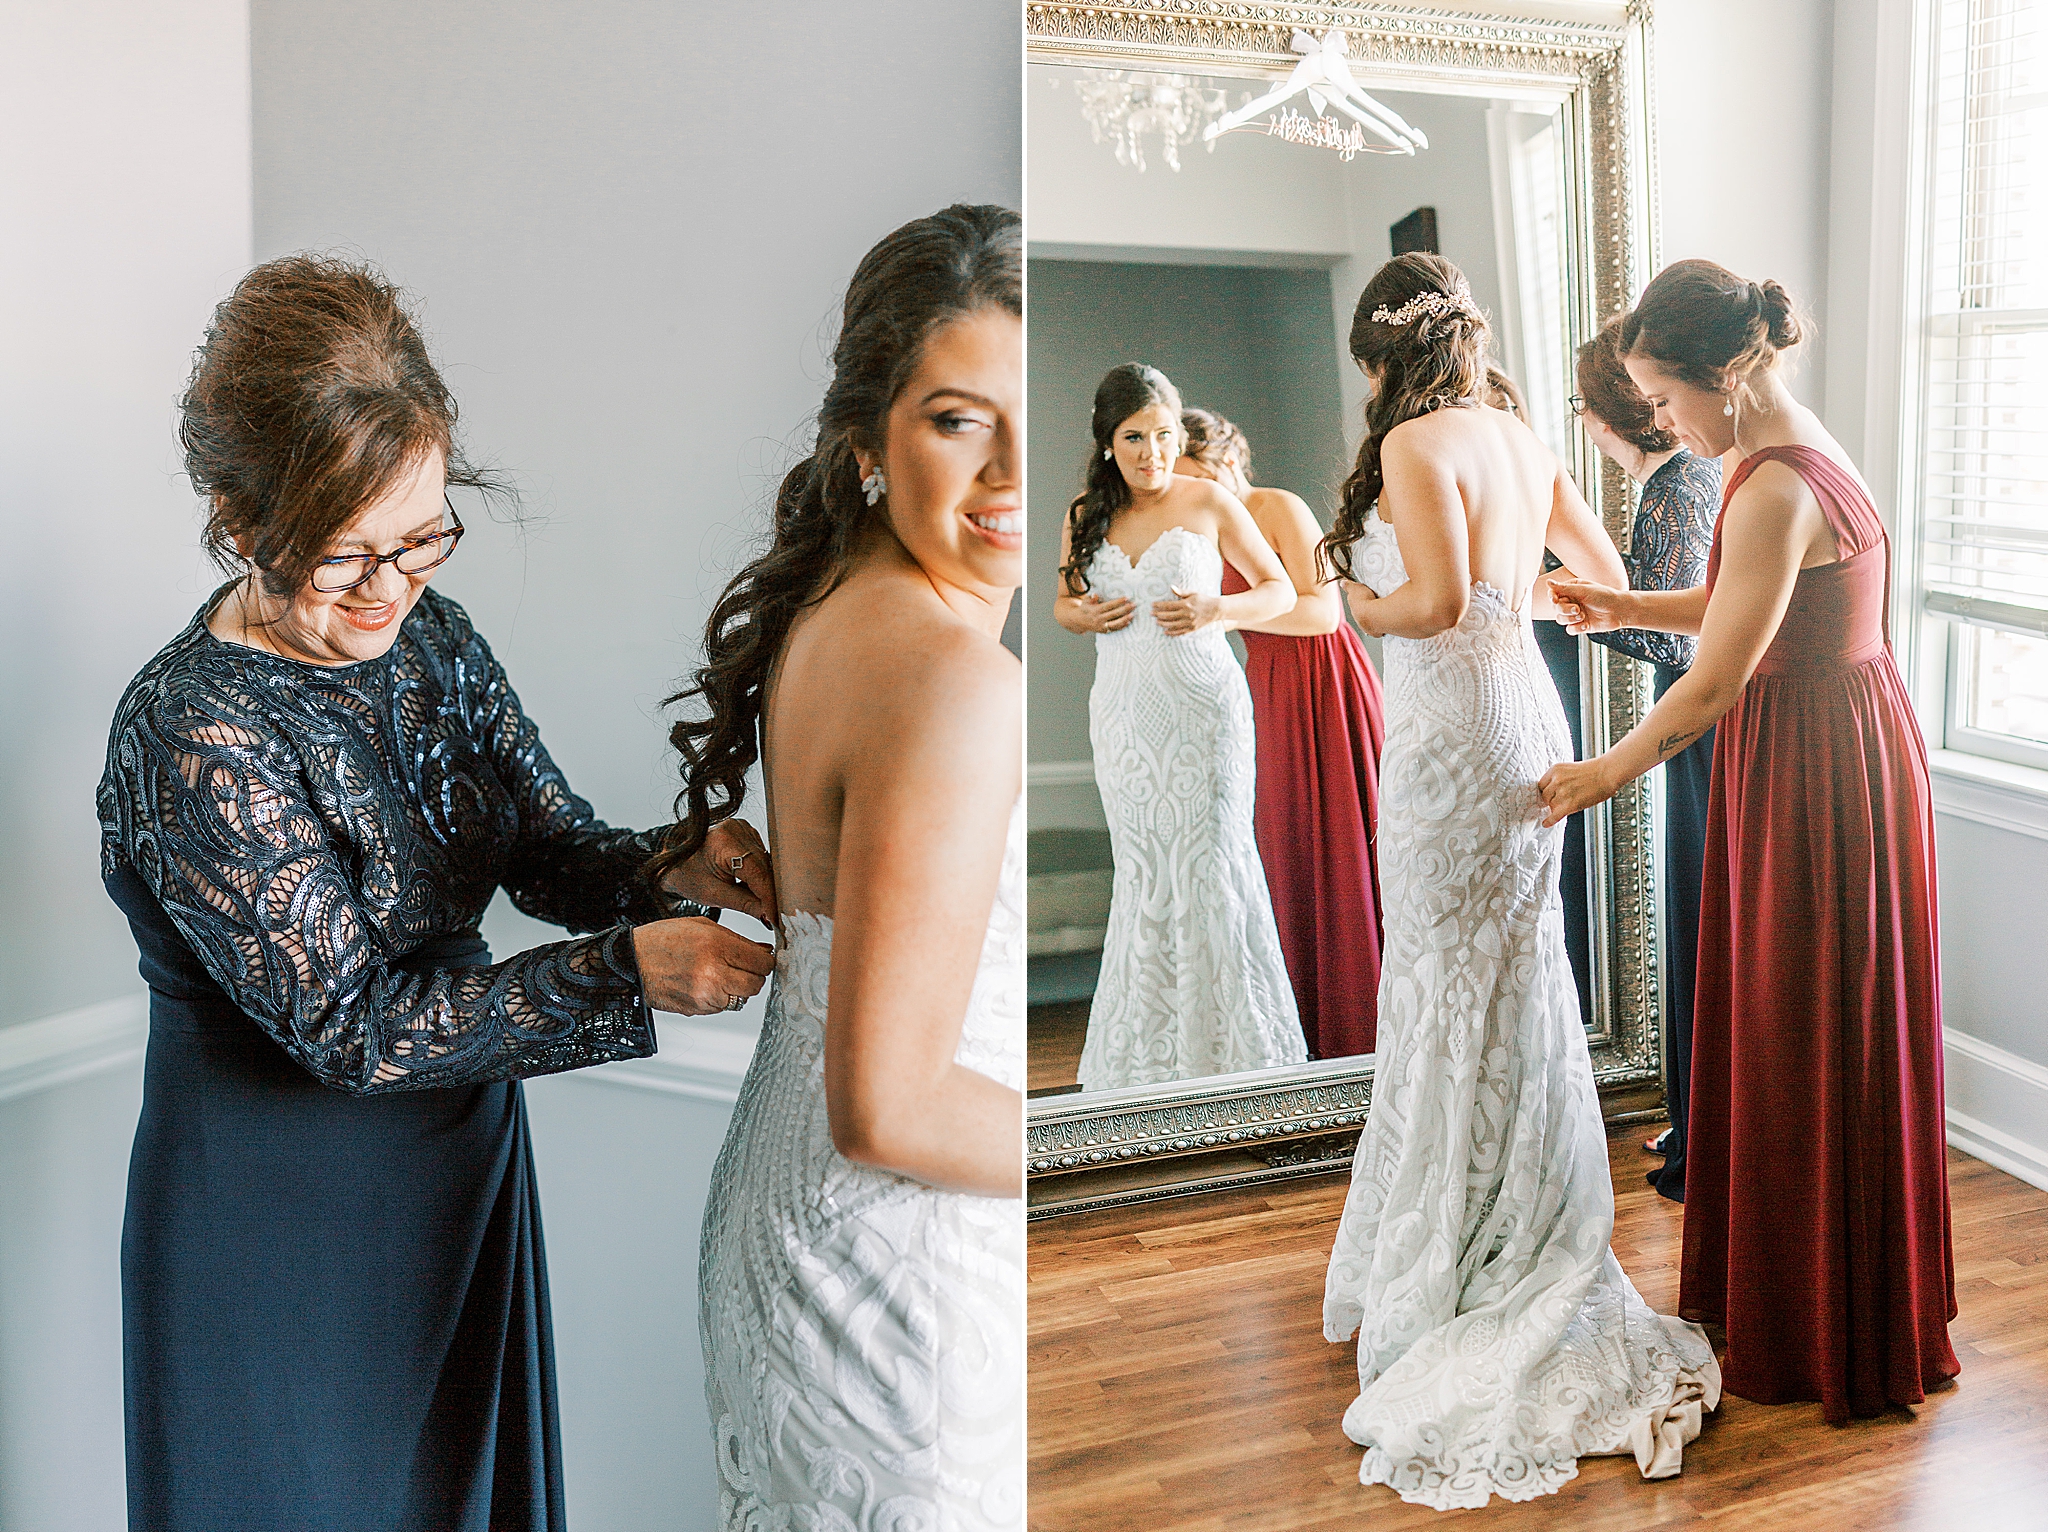 mom and sister help bride into wedding dress for dinner wedding party